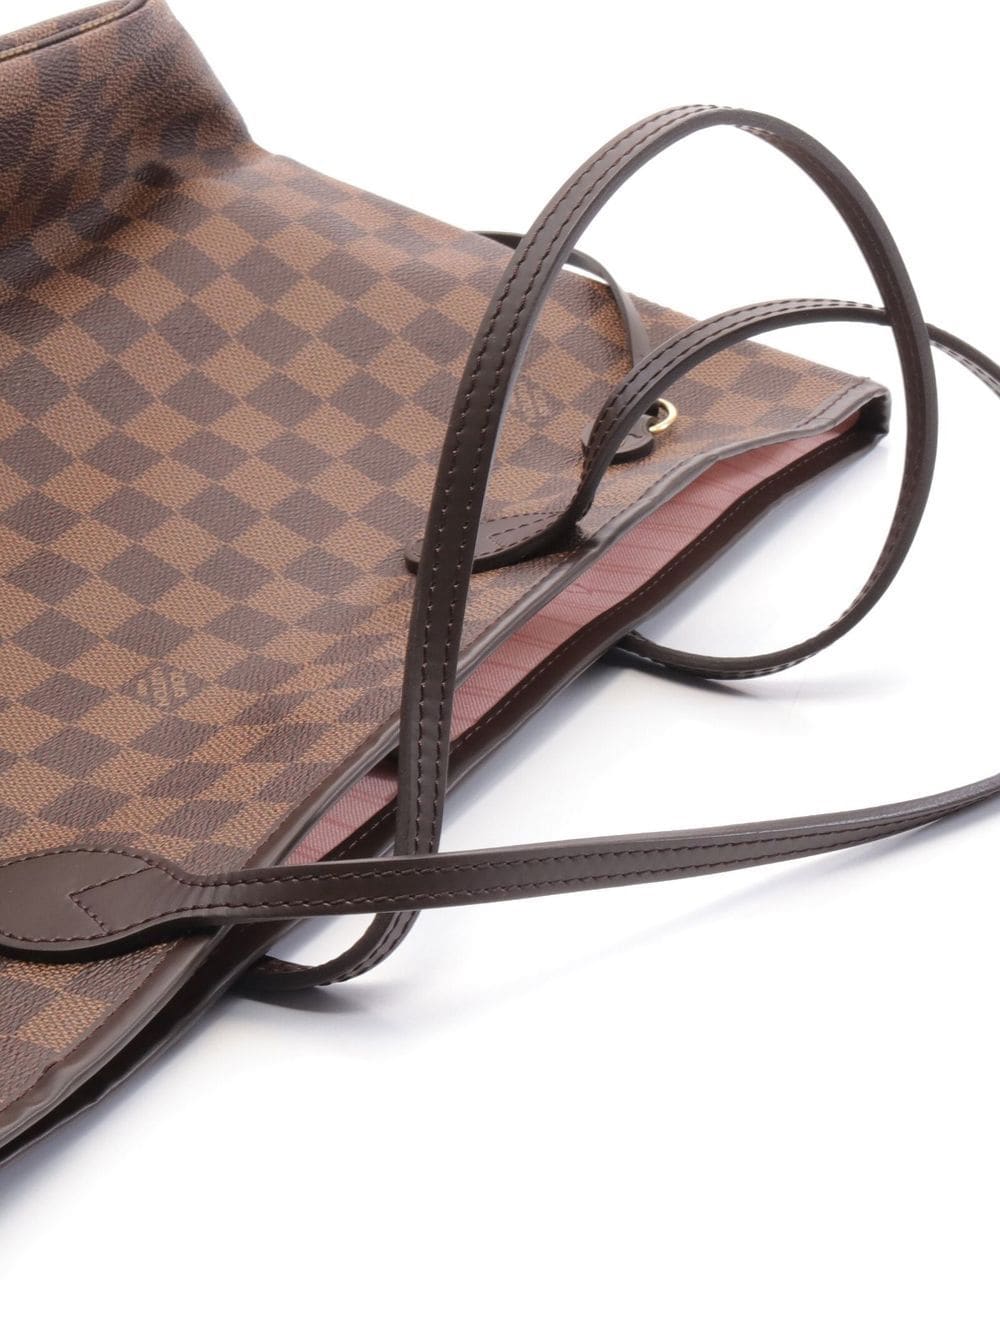 Louis Vuitton pre-owned Spring In The City Neverfull Handbag - Farfetch